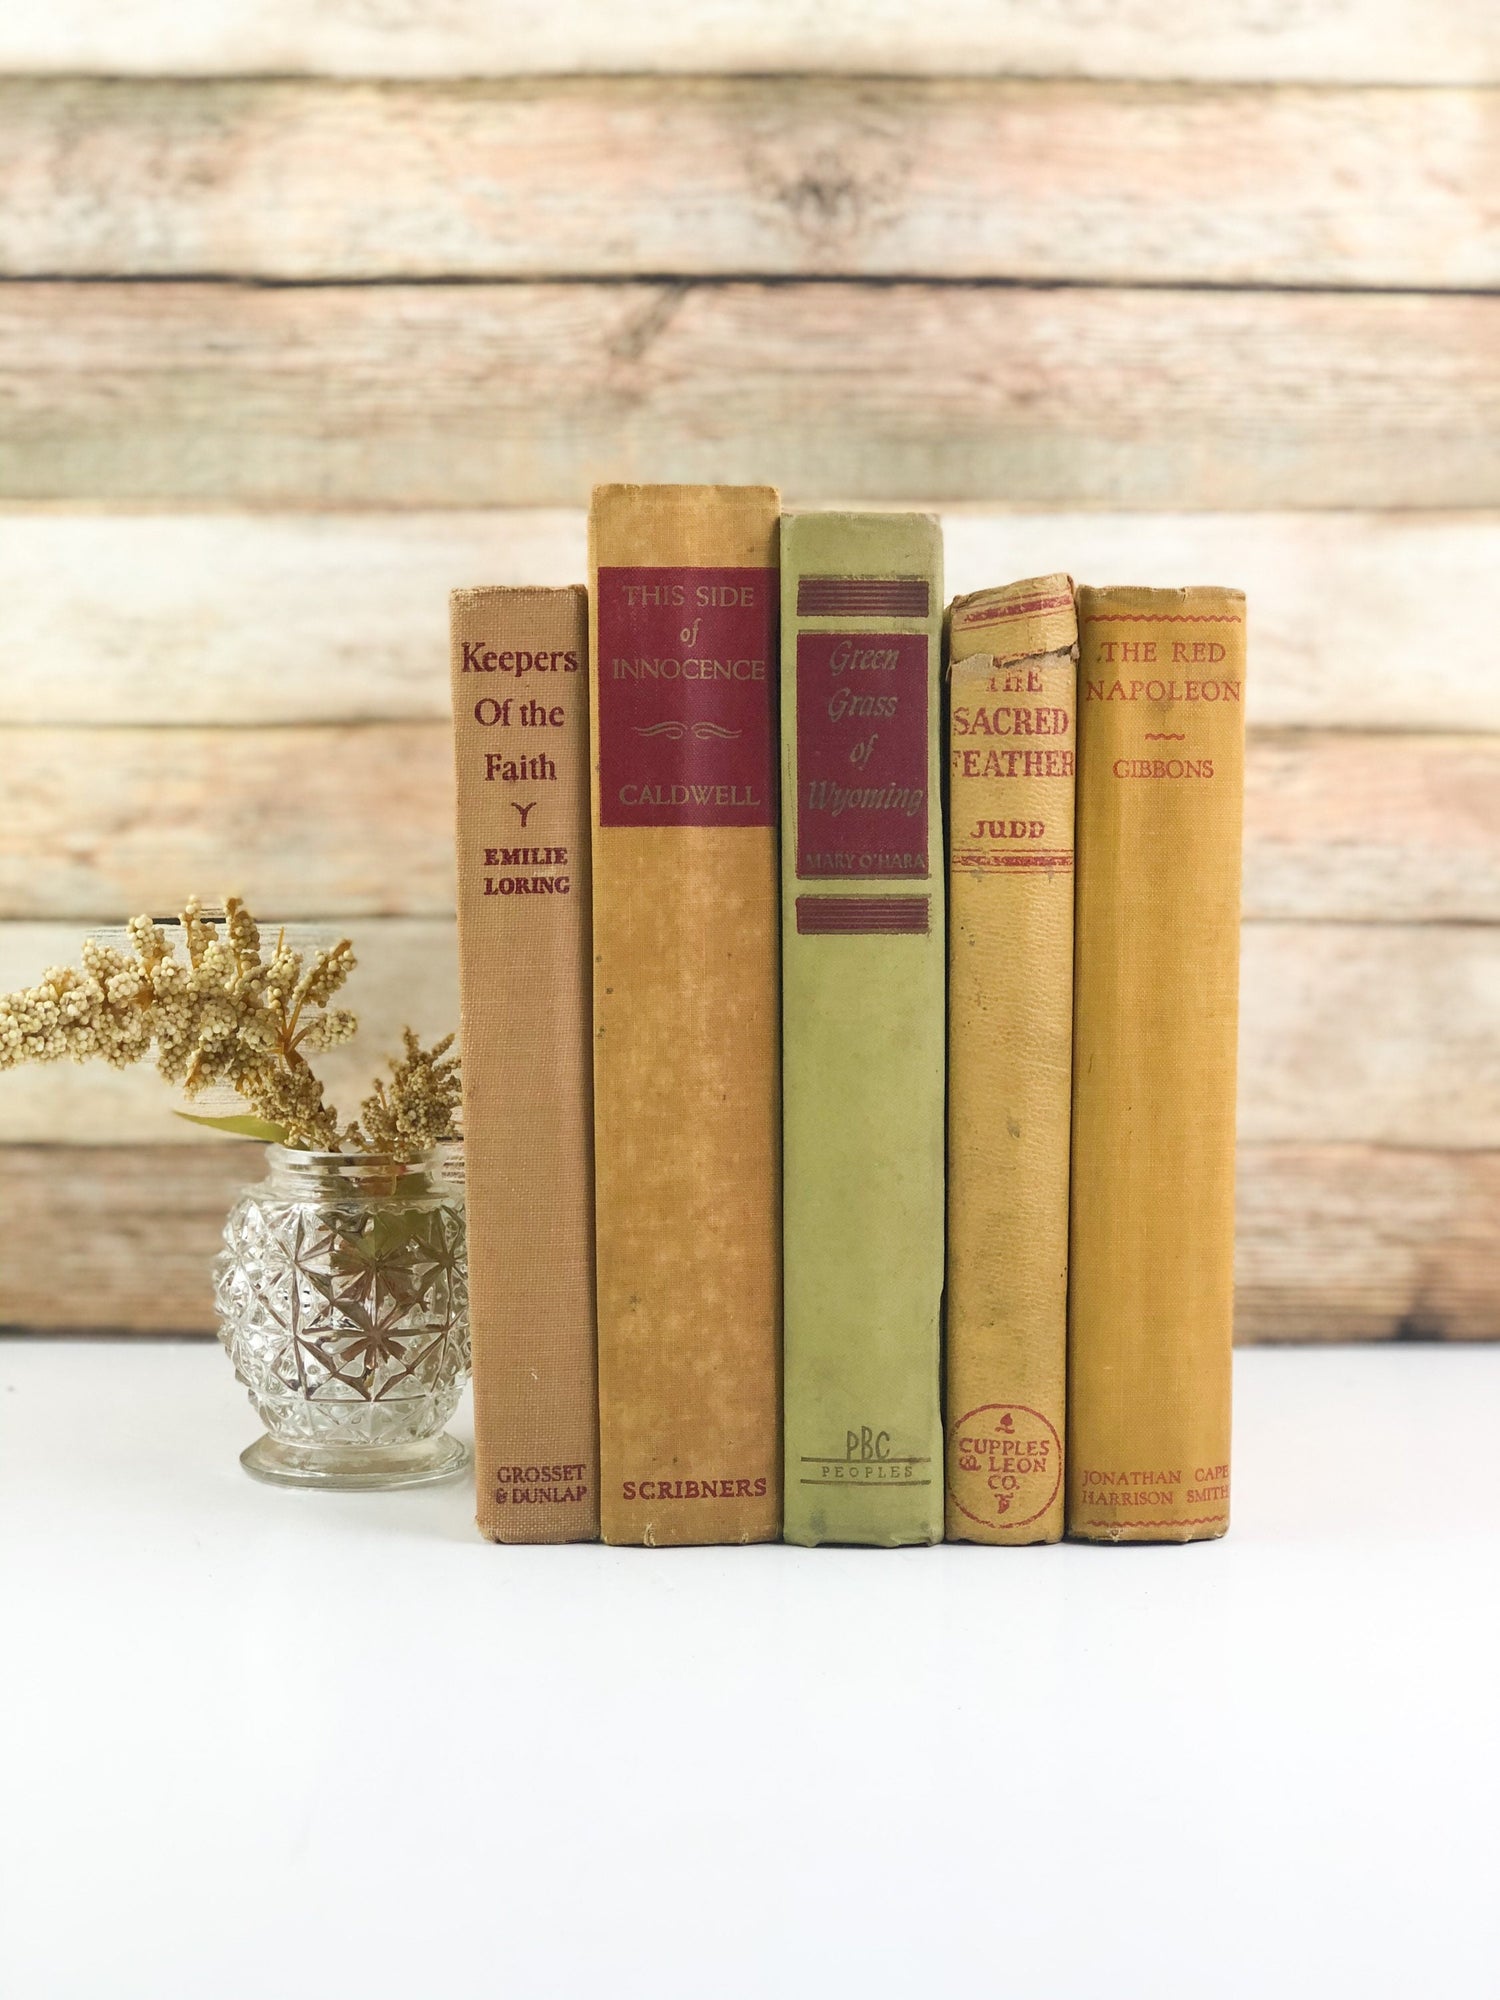 Red and Yellow Vintage Books